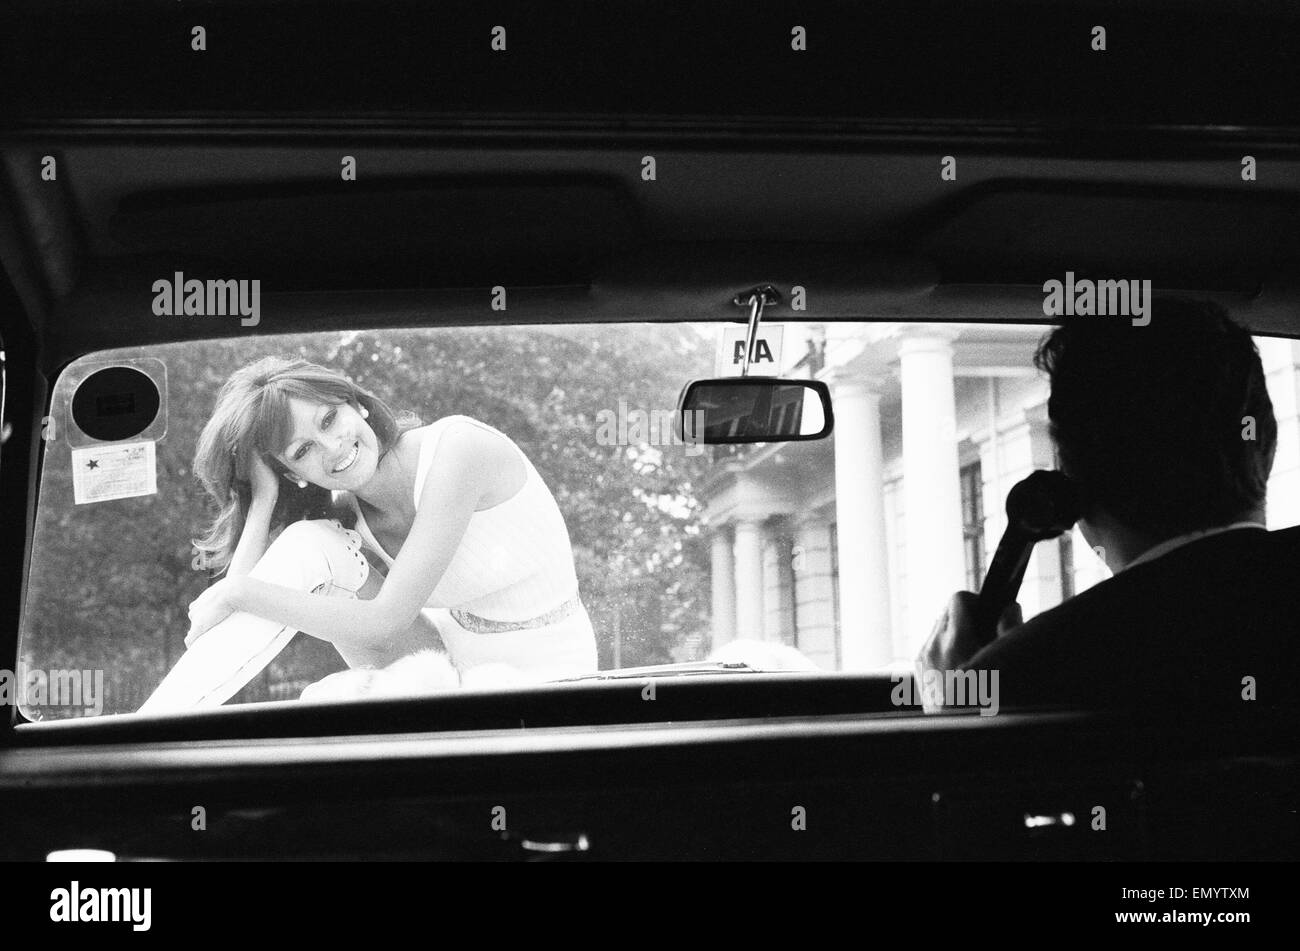 Lesley Russ photographed with her husband's car, Daimler Limousine, 'Silver Medallion' outside her London home in Hyde Park Gardens. 6th October 1972 Stock Photo